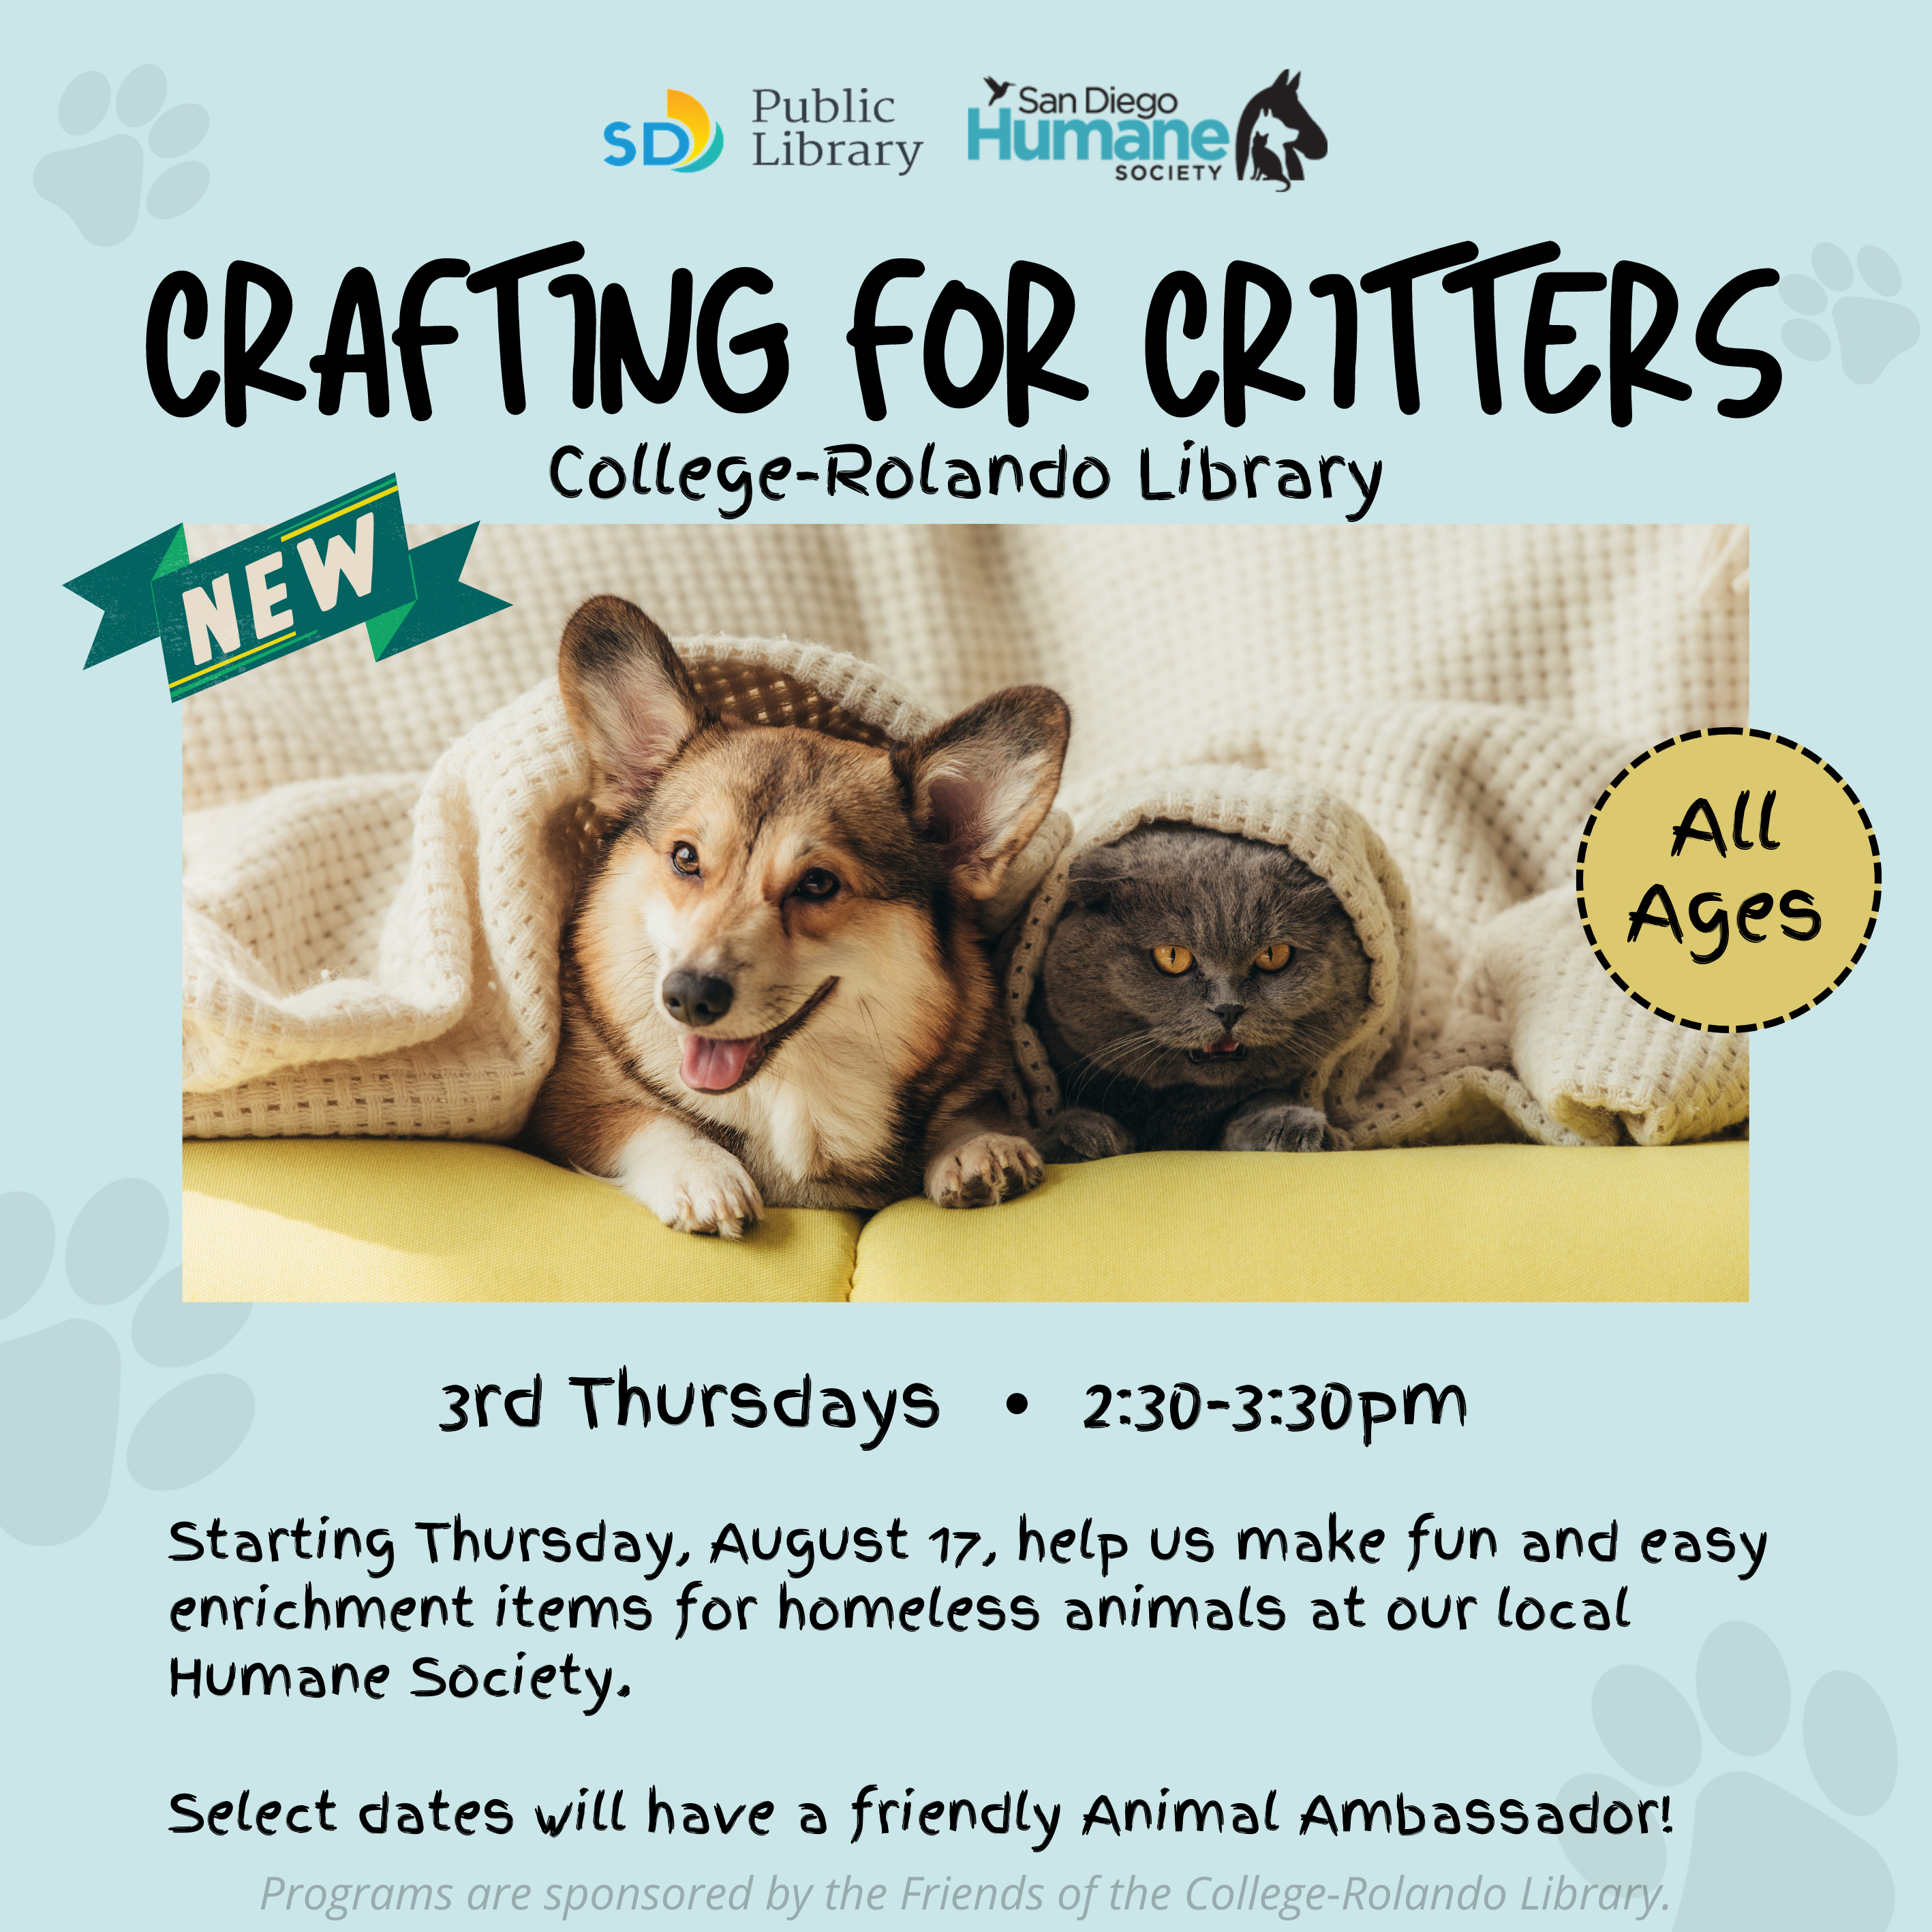 Crafting for Critters: College-Rolando Library. For all ages! 3rd Thursdays 2:30-3:30 p.m. Starting Thursday, Aug. 17, help us make fun and easy enrichment items for homeless animals at our local Humane Society. Select dates will have a friendly Animal Ambassador! Programs are sponsored by the Friends of the College-Rolando Library.